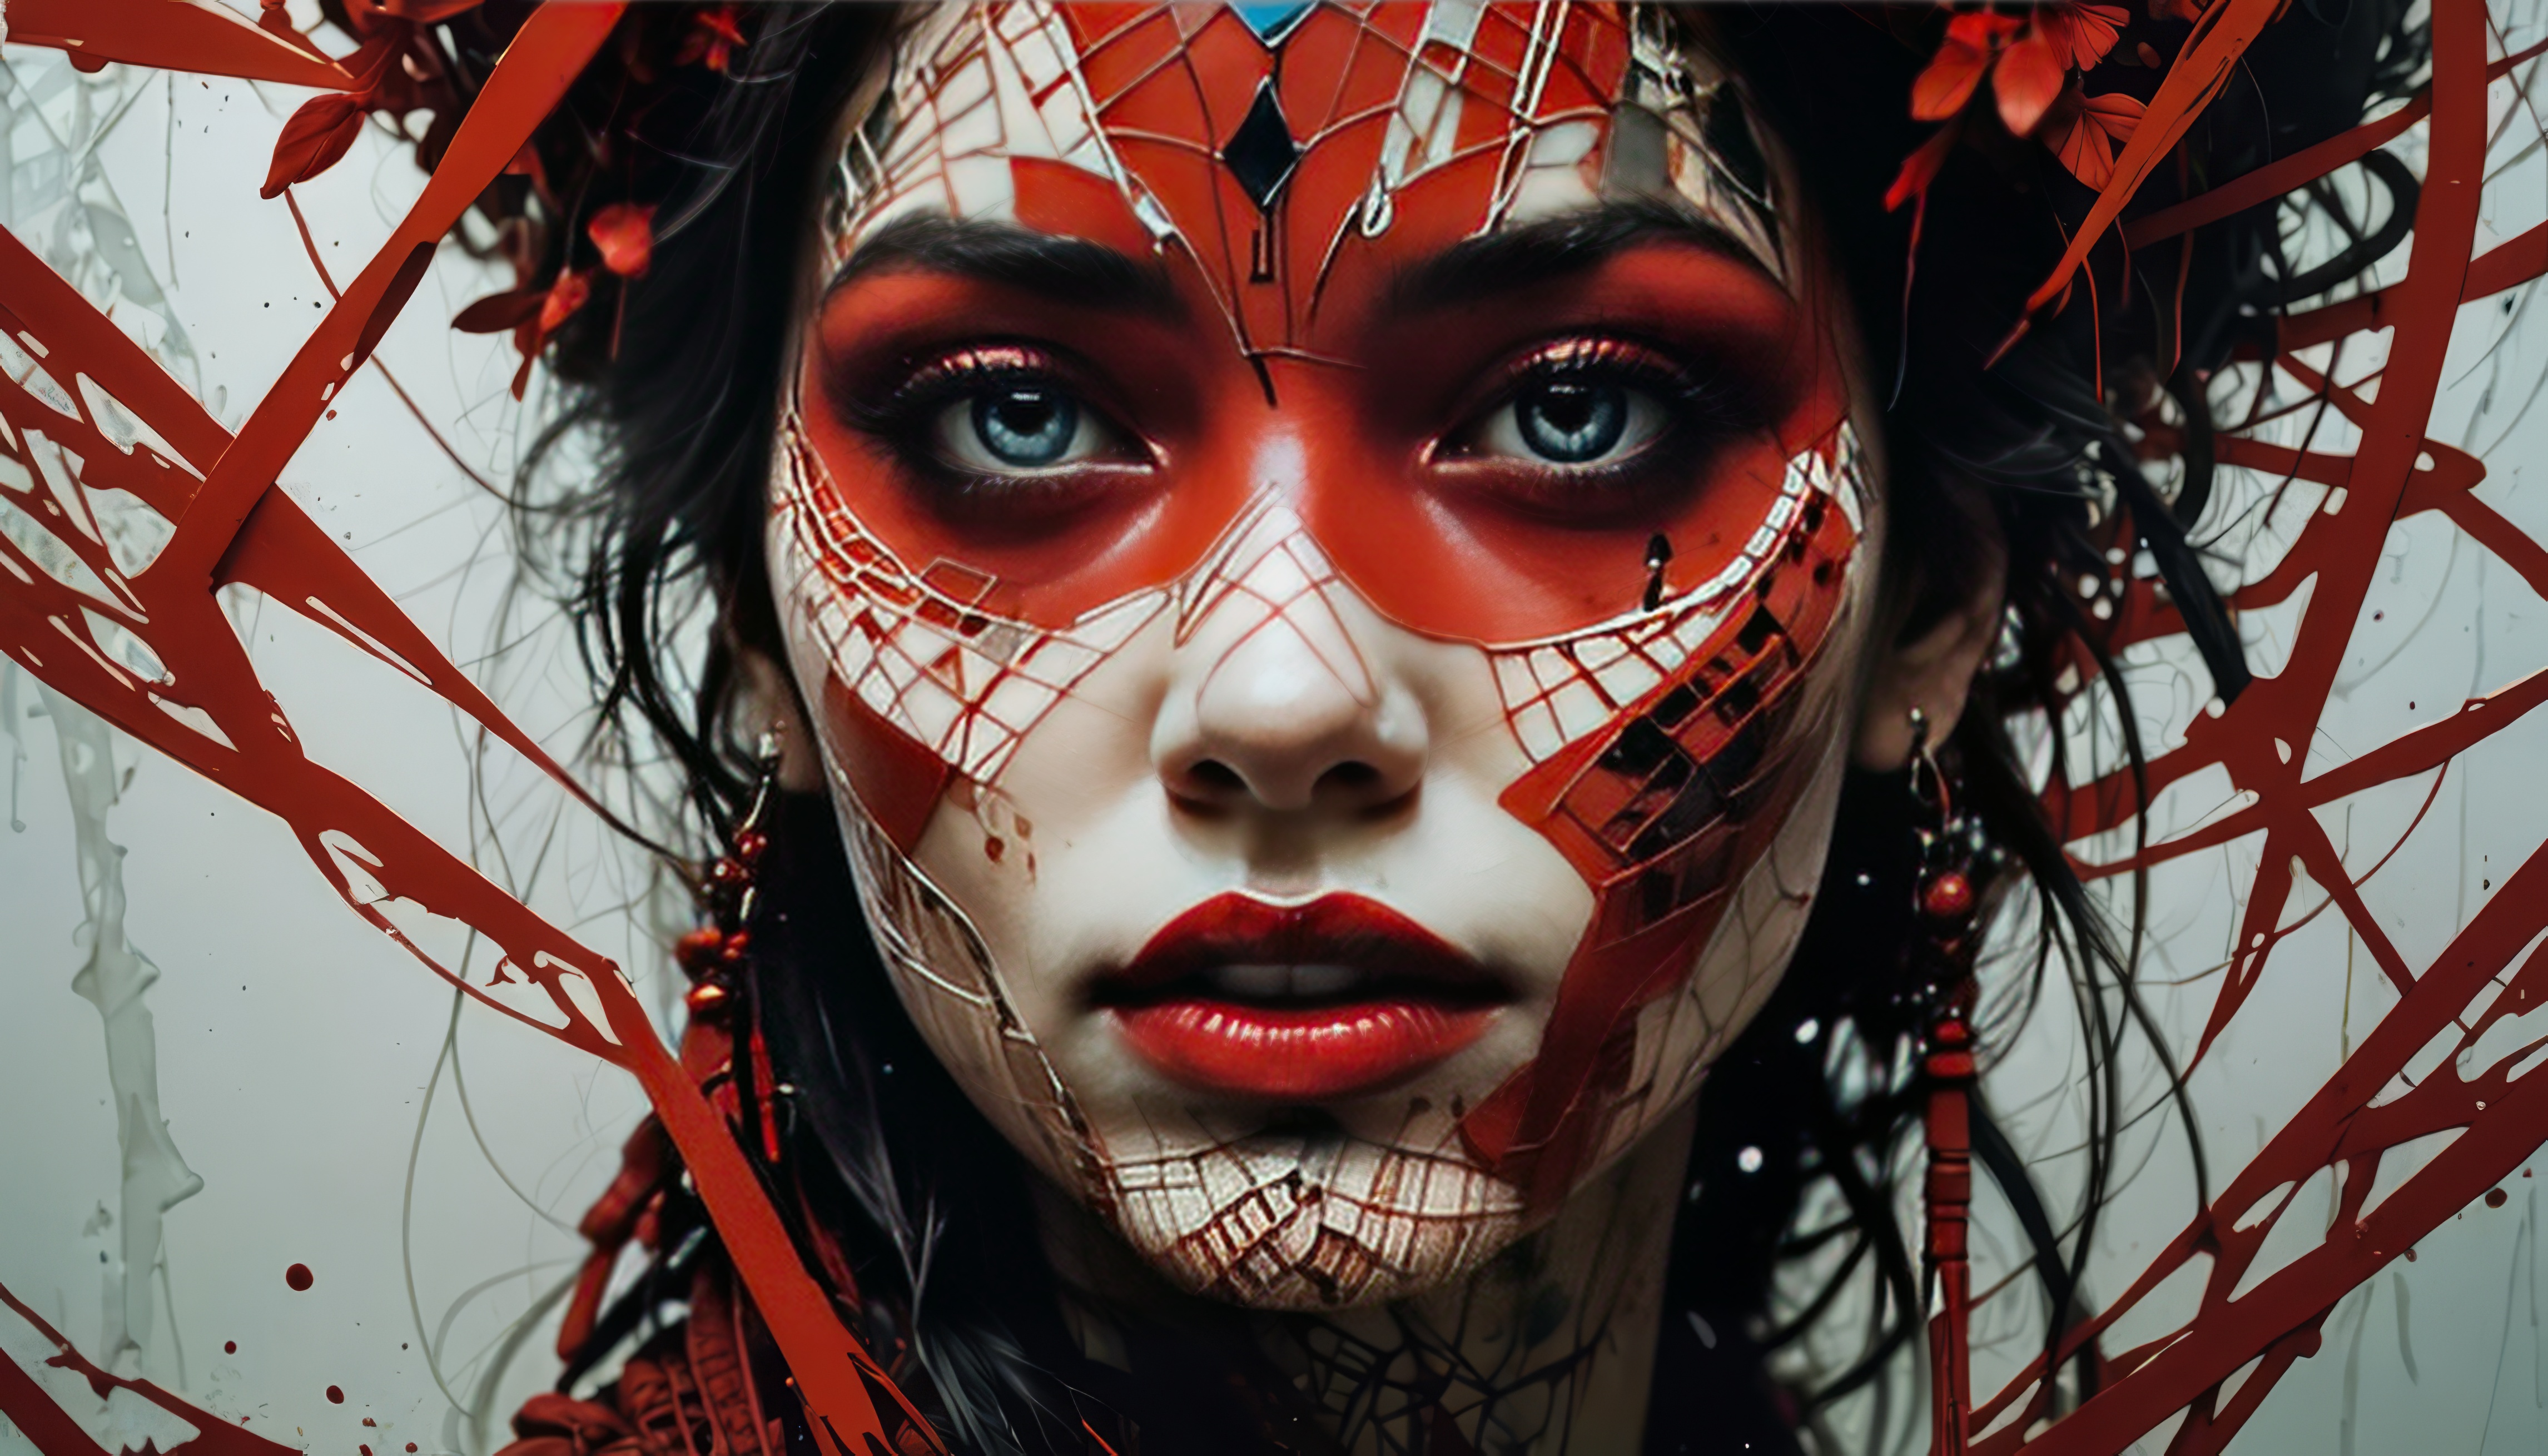 Free photo A woman with a red painted head, black hair and red makeup